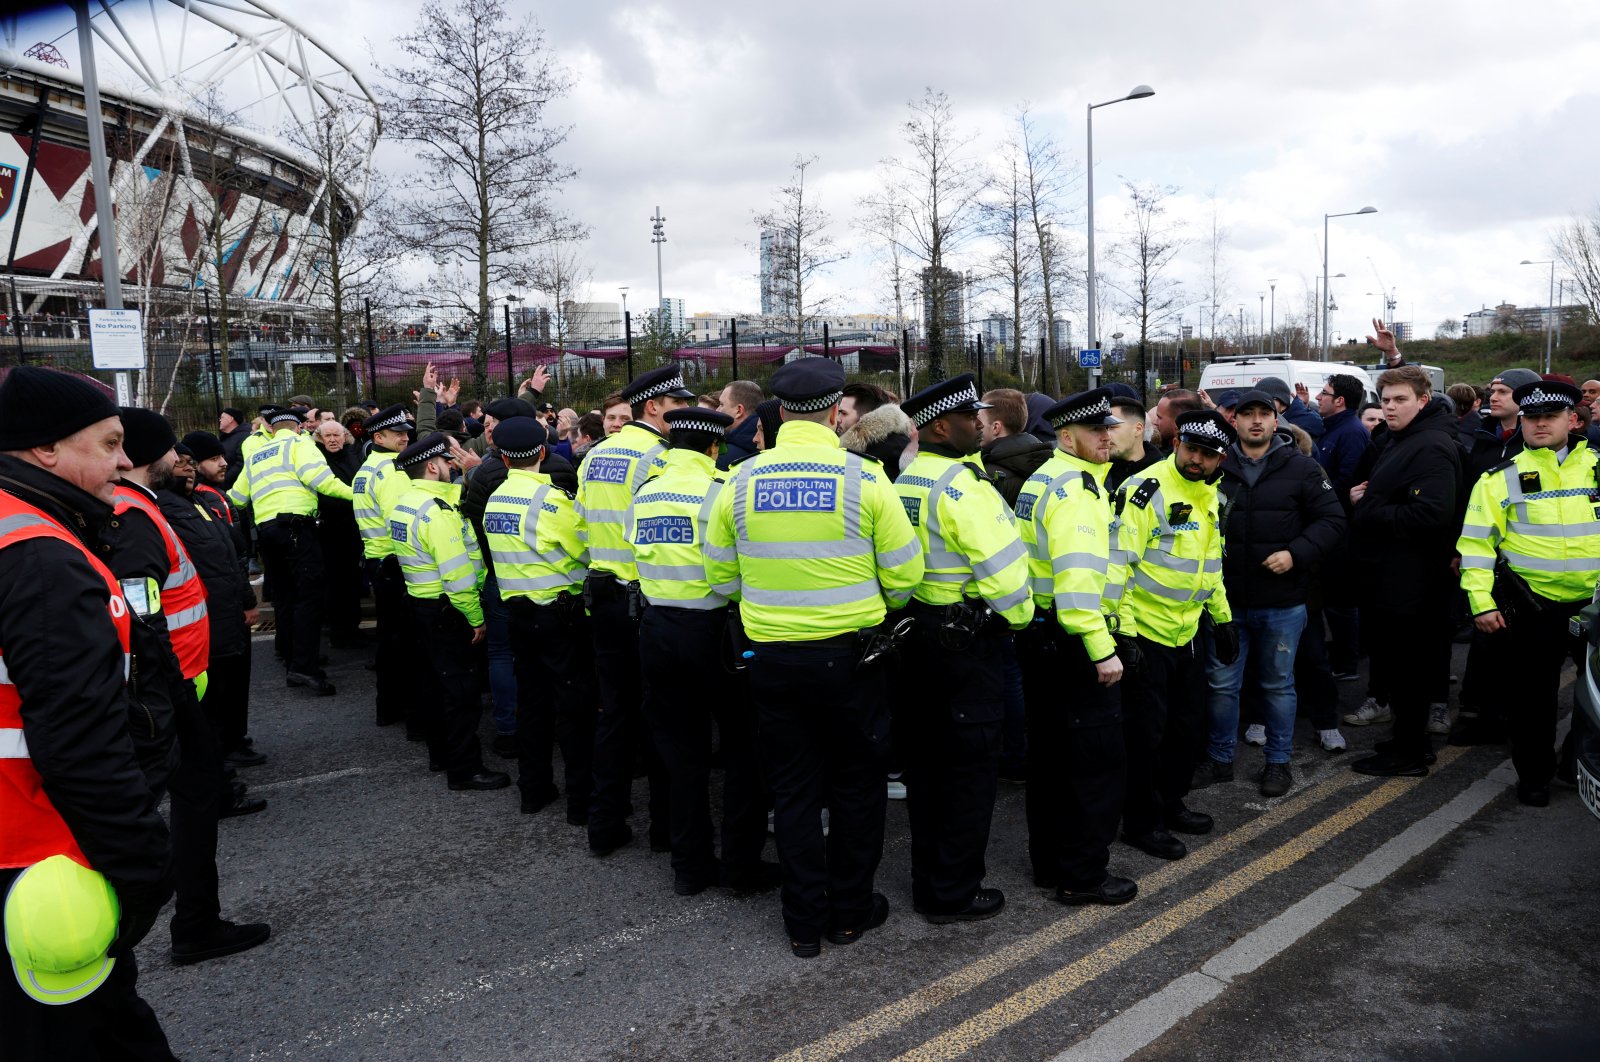 A general view of police officers outside the stadium, London, Feb. 29, 2020. (REUTERS Photo)